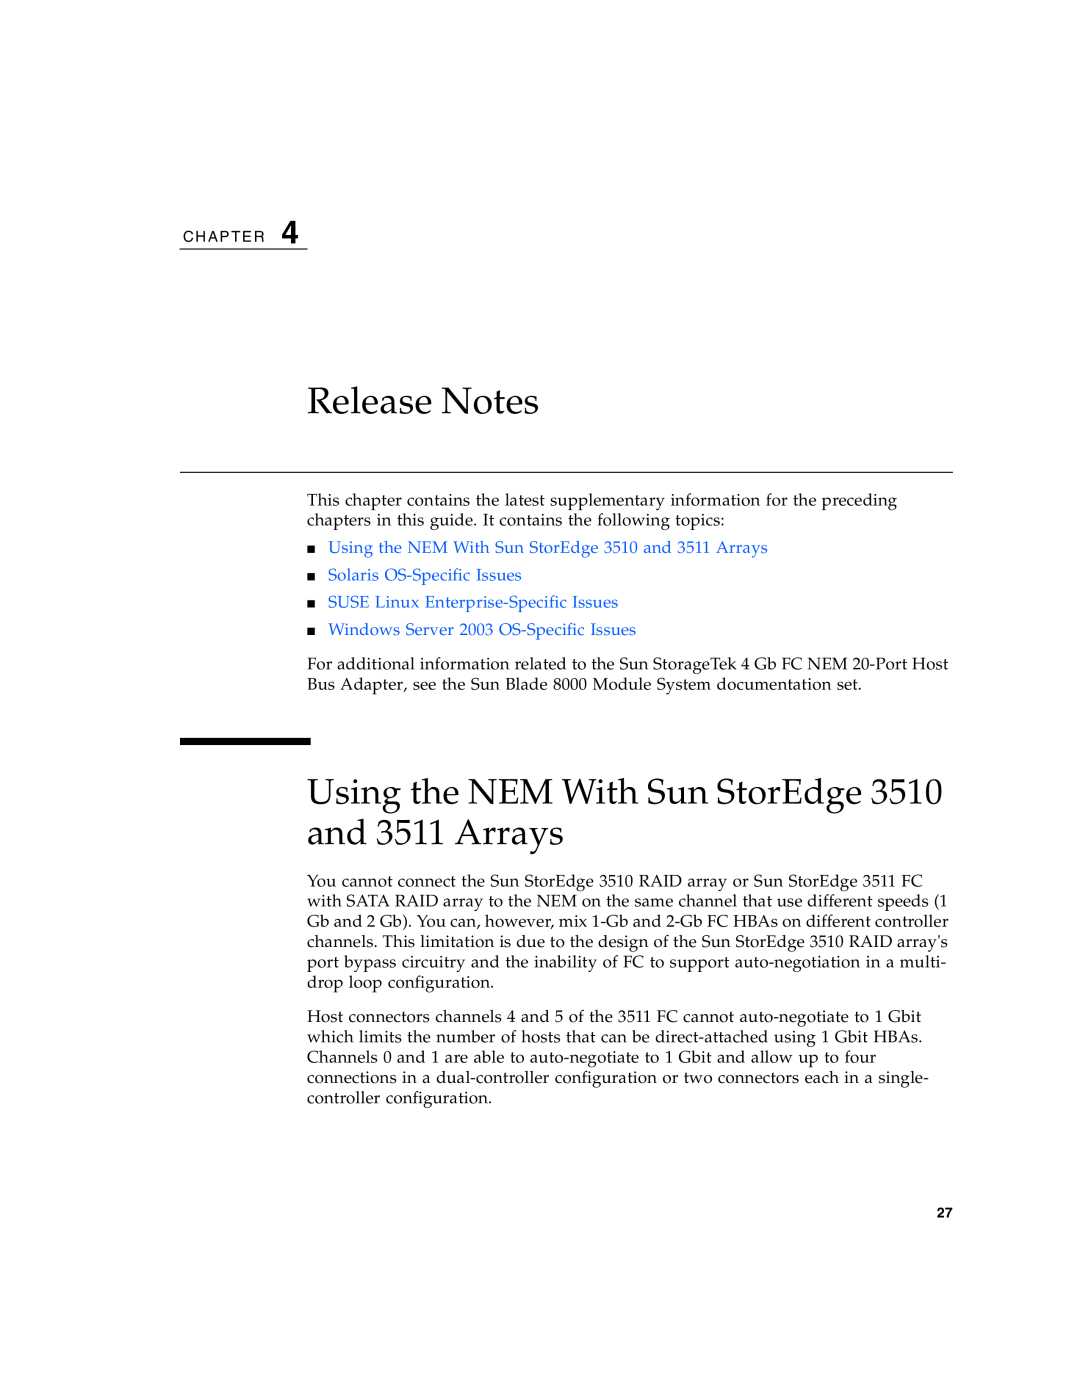 Sun Microsystems 2.0 manual Release Notes, Using the NEM With Sun StorEdge 3510 and 3511 Arrays 